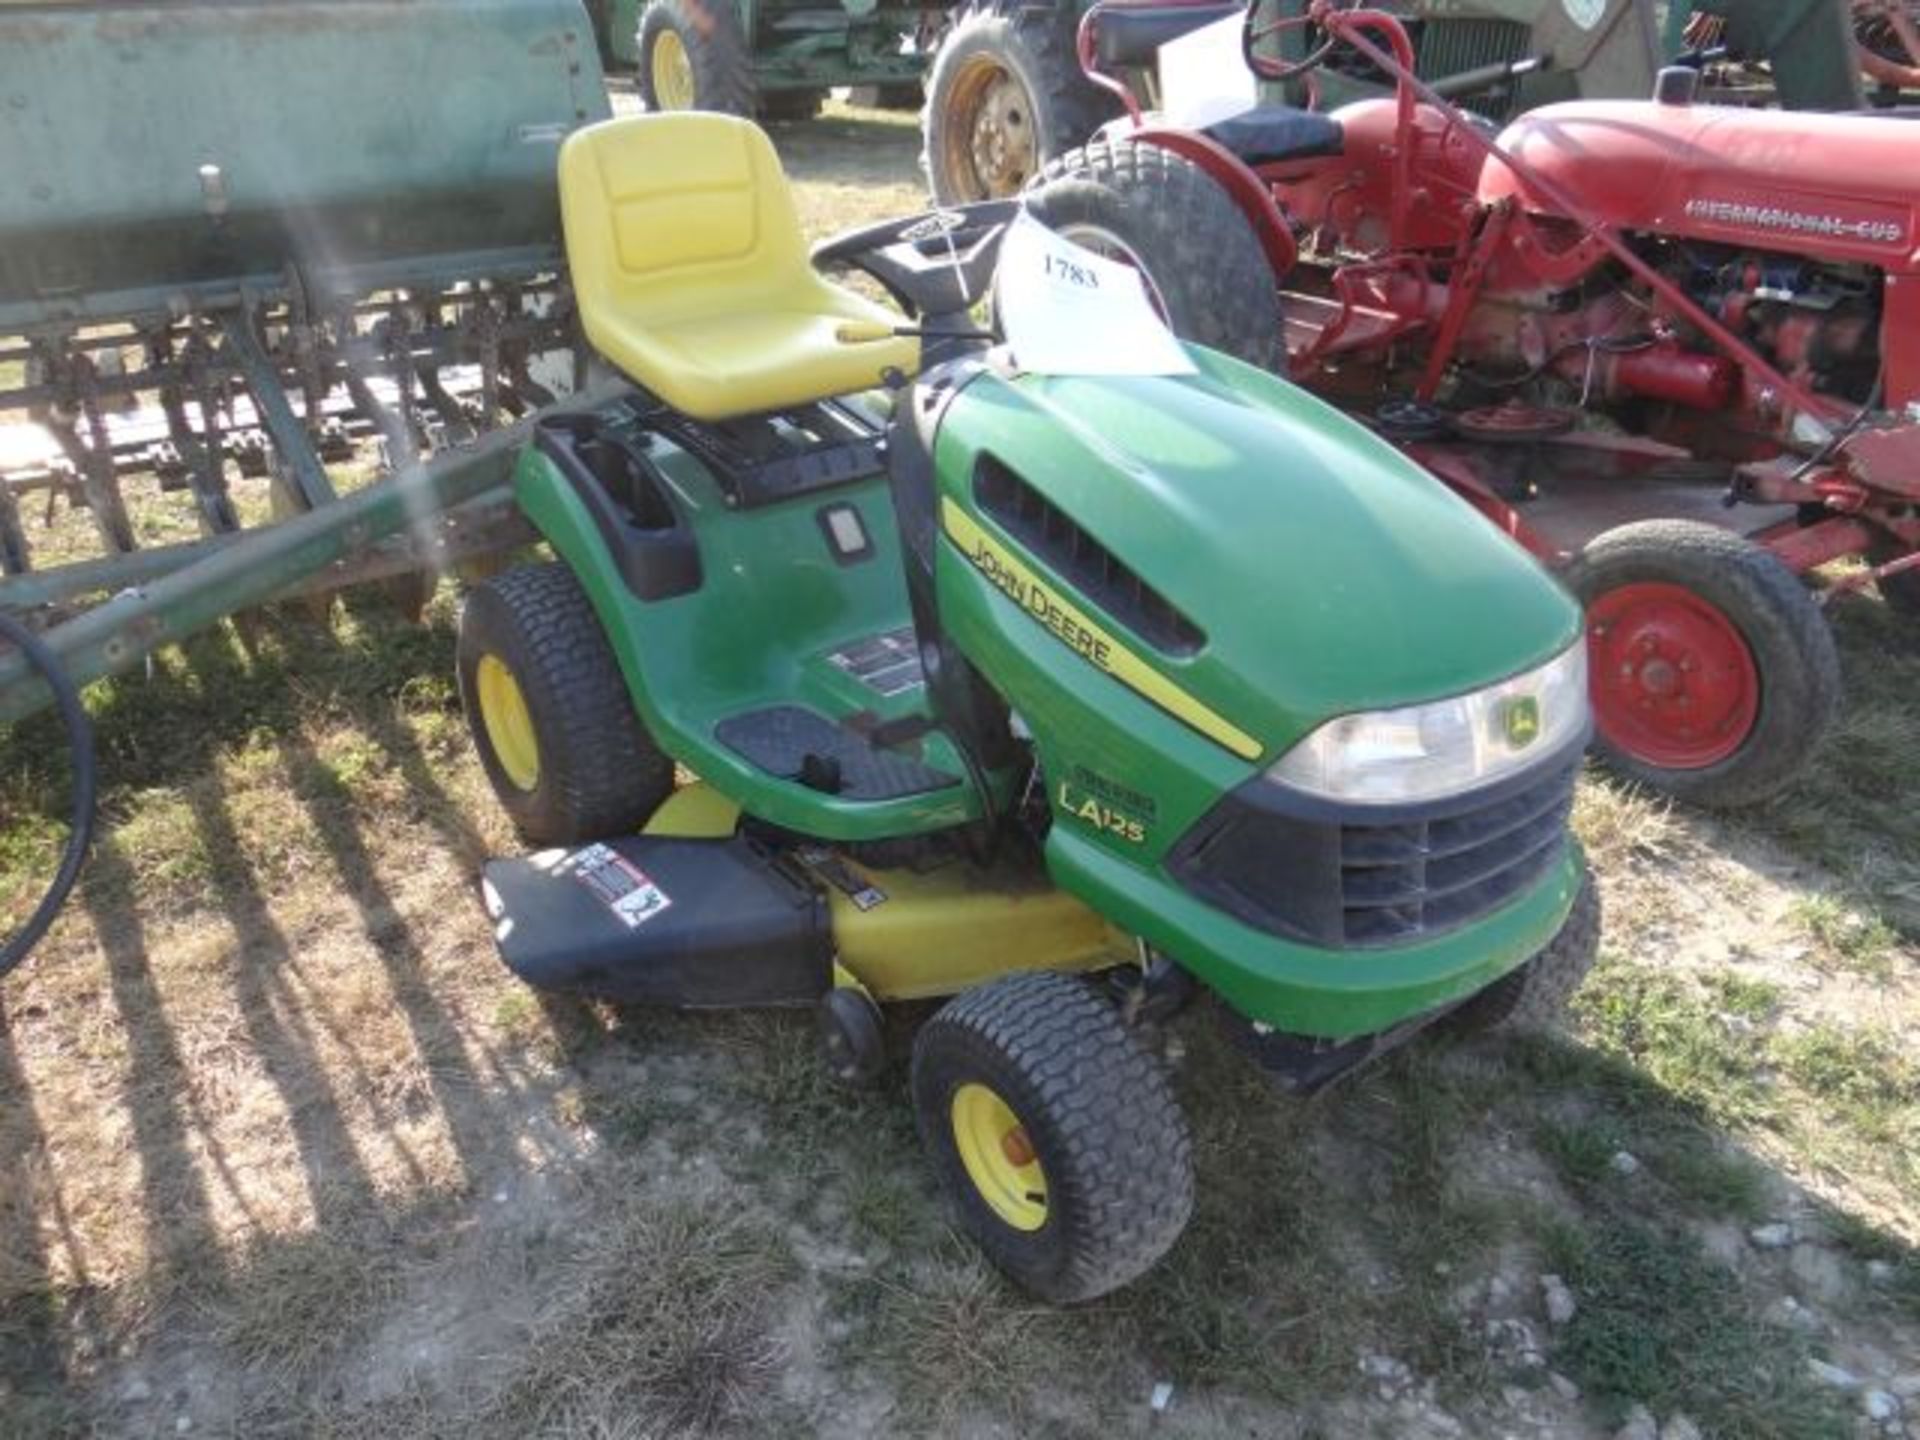 JD LA125 Riding Mower 30" Deck, 11hp, Manual in the Shed